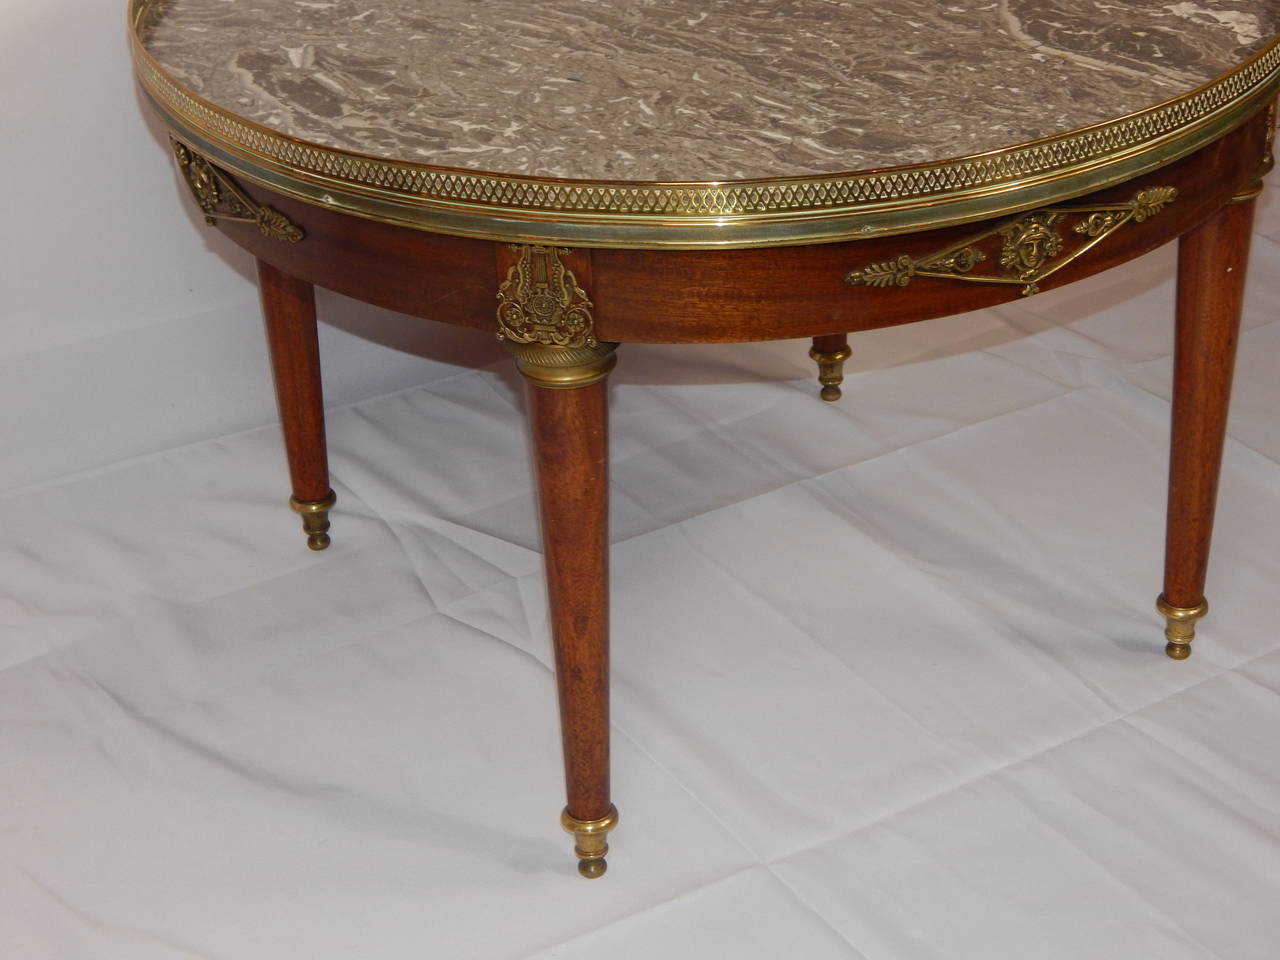 Good quality Empire style bronze mounted mahogany coffee or cocktail table,
having a grey mottled marble top inset, surrounded by a pierced brass gallery.